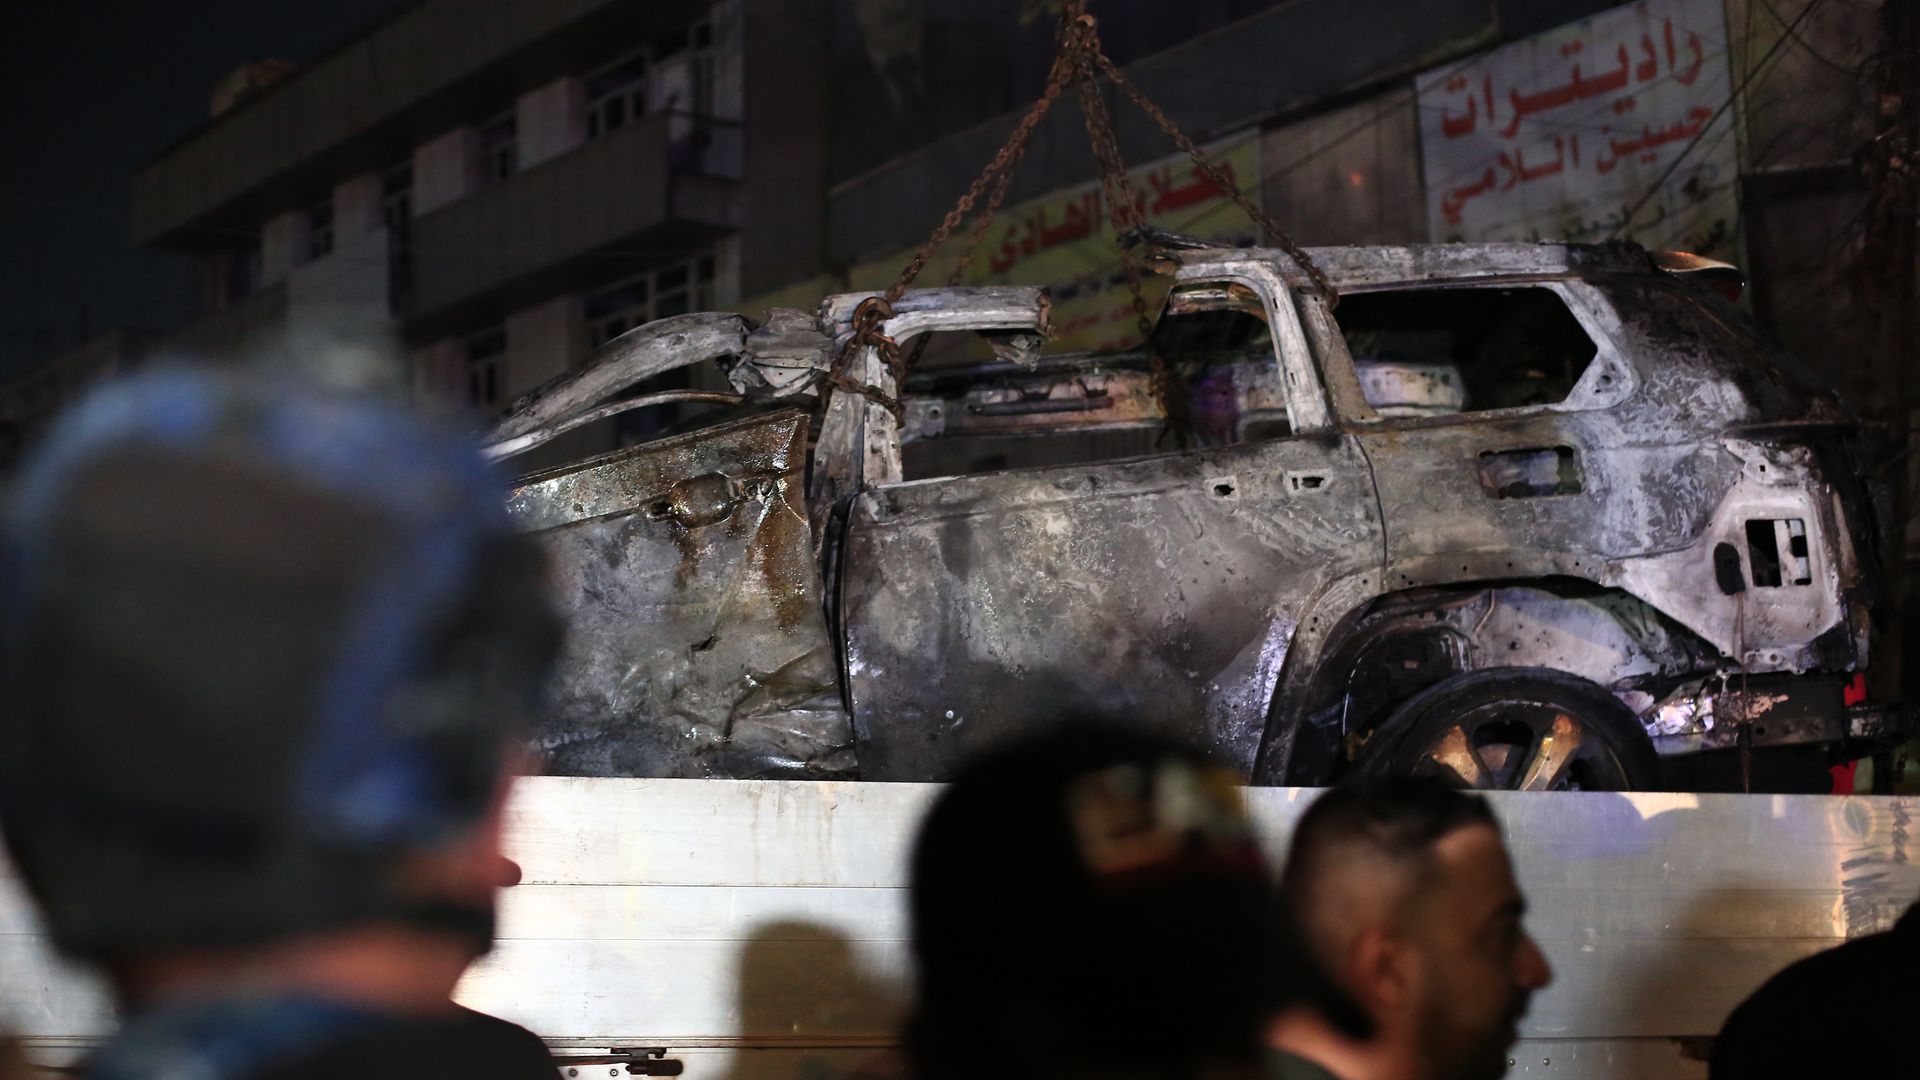 A vehicle that was hit by a drone strike on Feb. 7 in Baghdad. Photo: Ameer Al-Mohammedawi/picture alliance via Getty Images